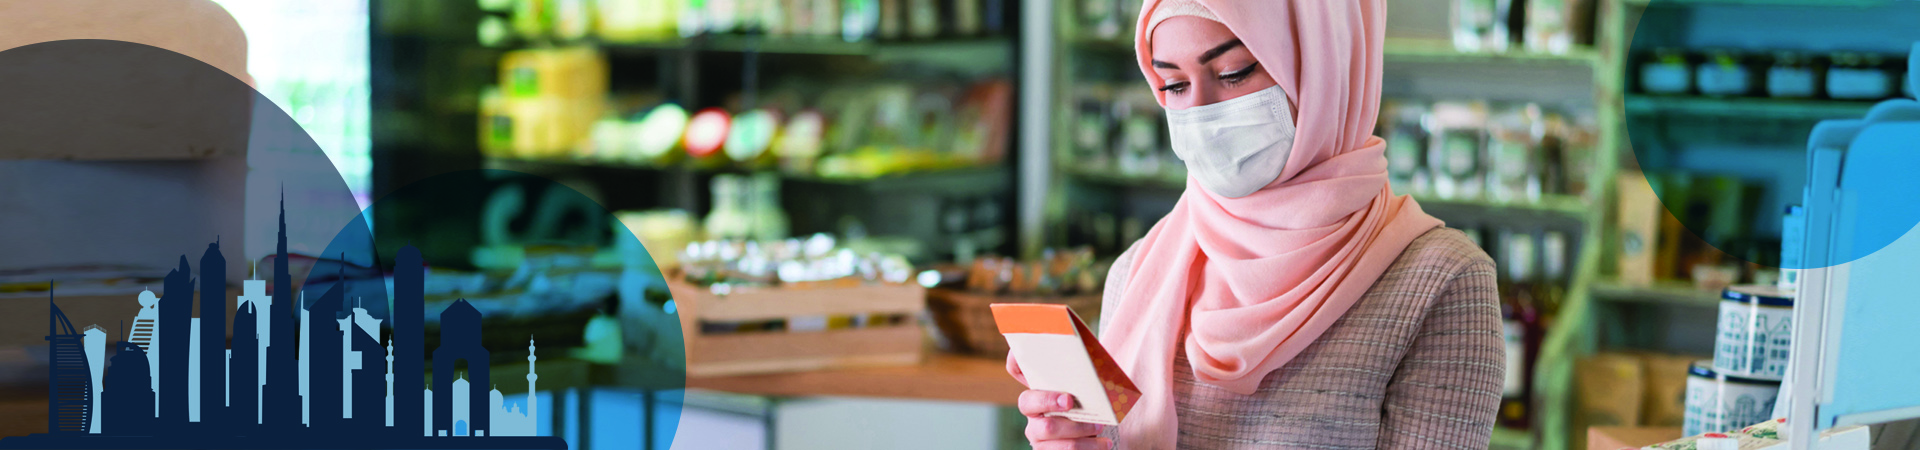 The UAE’s omni-channel consumer: Striking a balance between online and in-store shopping experiences